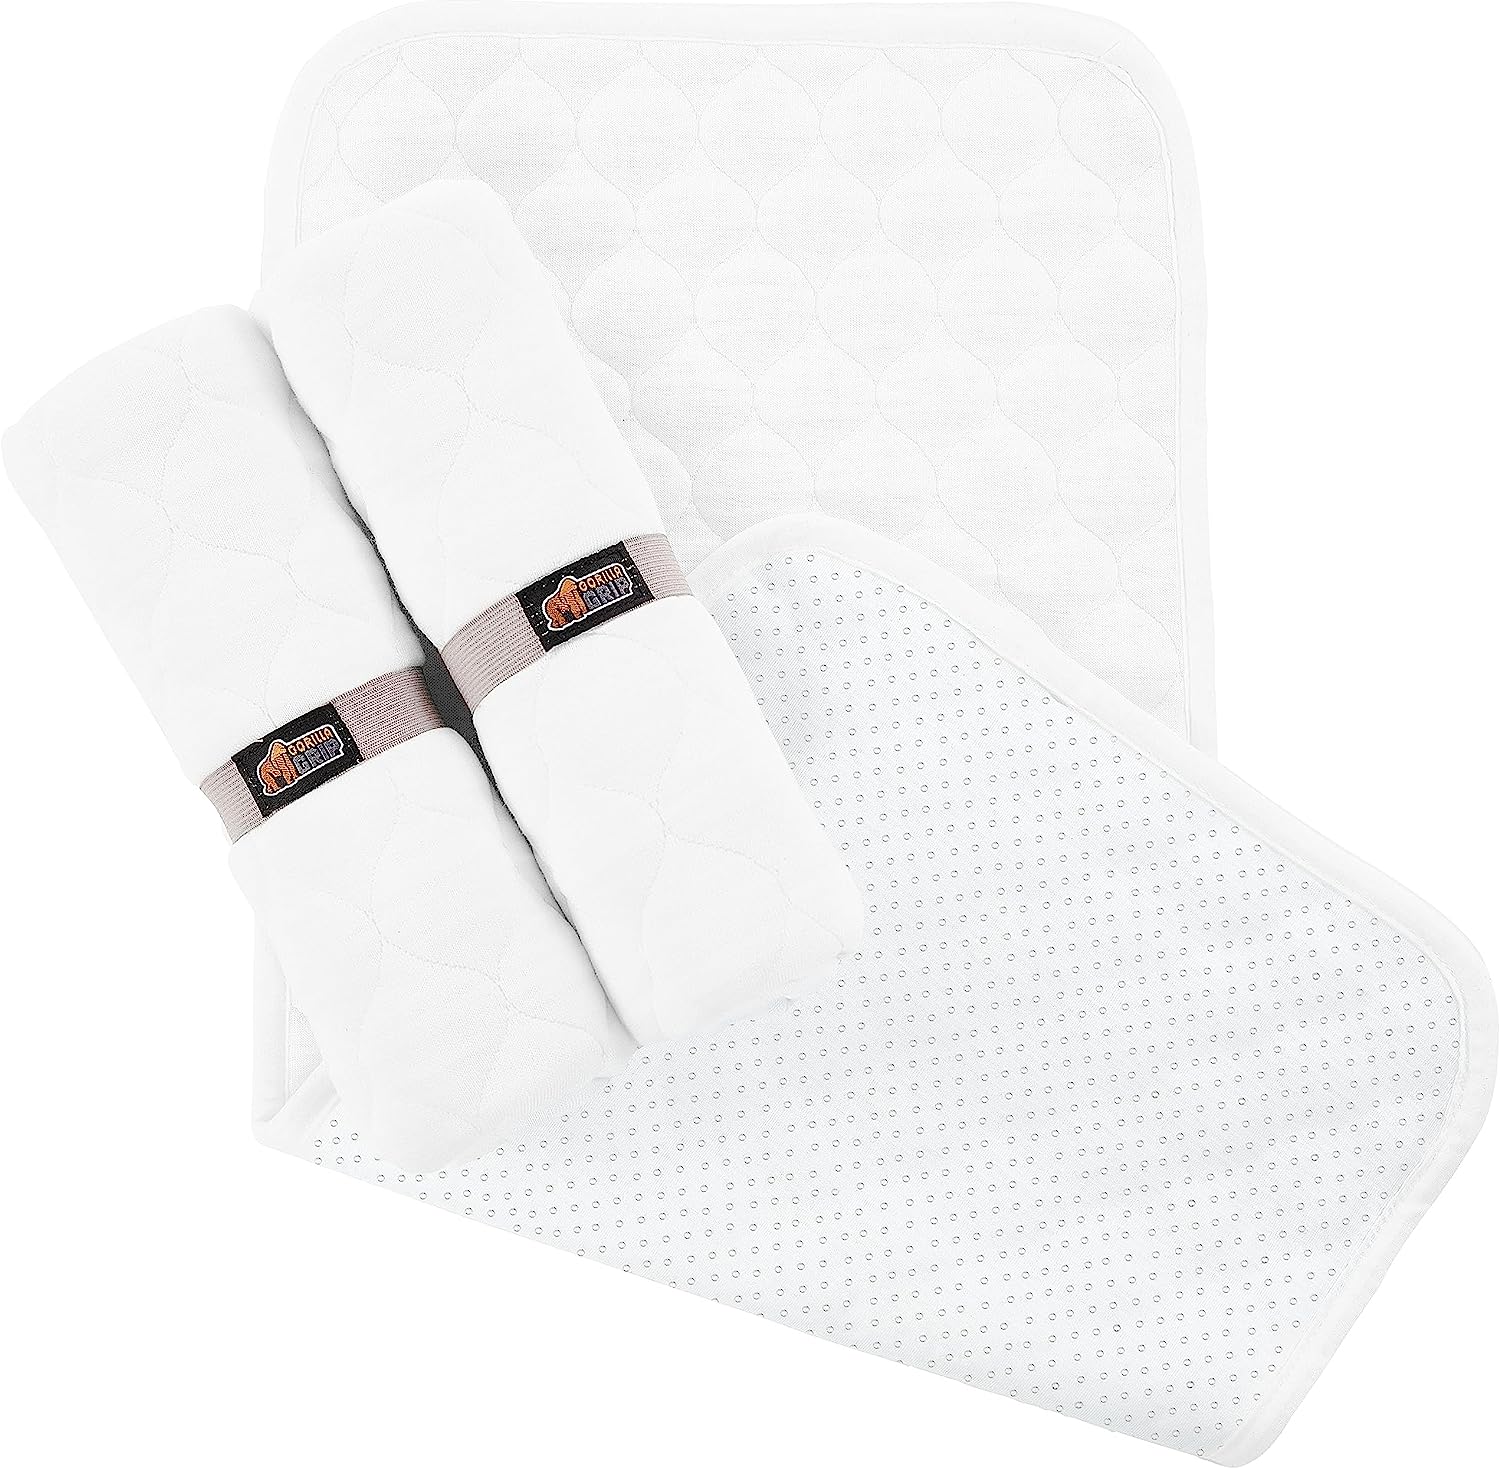 Gorilla Grip  3 Pack Soft Quilted Waterproof Baby Changing Pad Liners